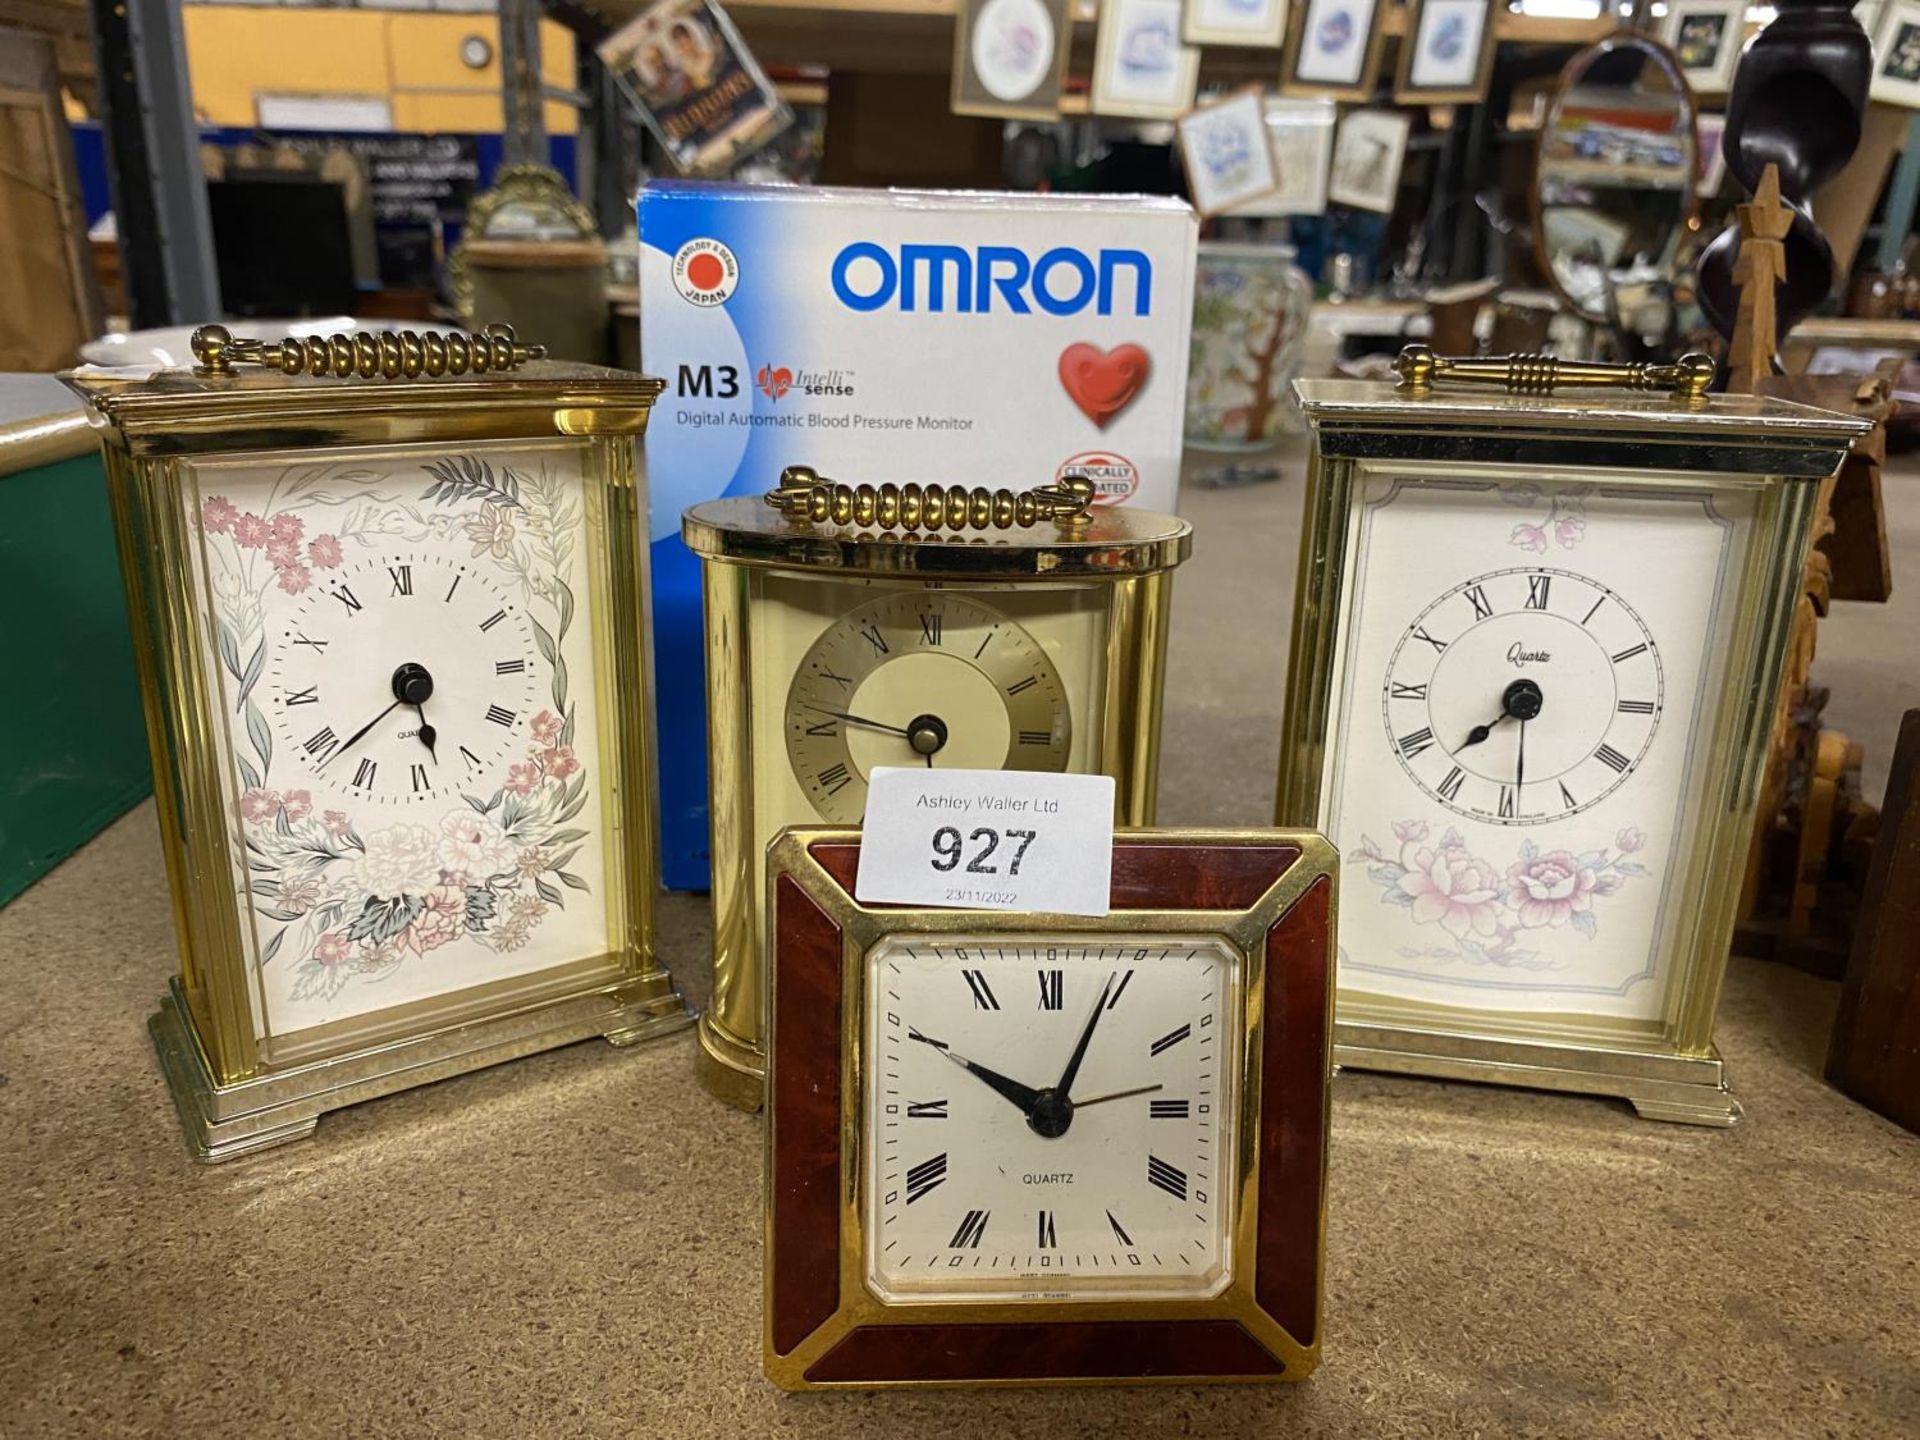 A QUANTITY OF CLOCKS TO INCLUDE THREE CARRIAGE CLOCKS, A BEDSIDE CLOCK AND AN OMRON DIGITAL BLOOD